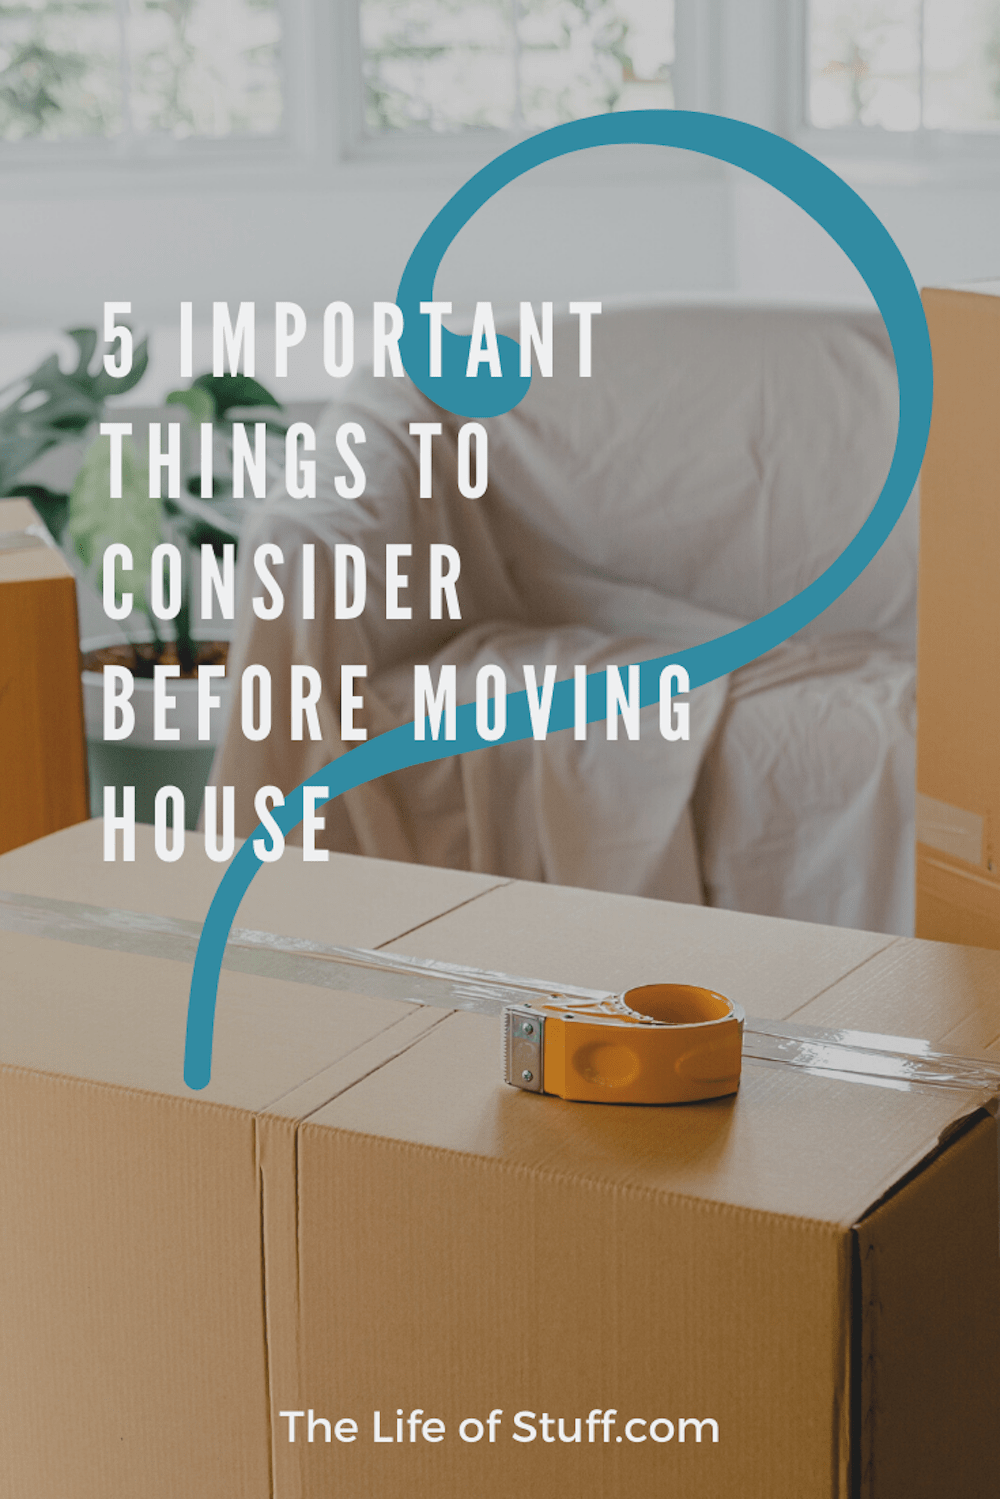 5 Important Things To Consider Before Moving House - The Life of Stuff